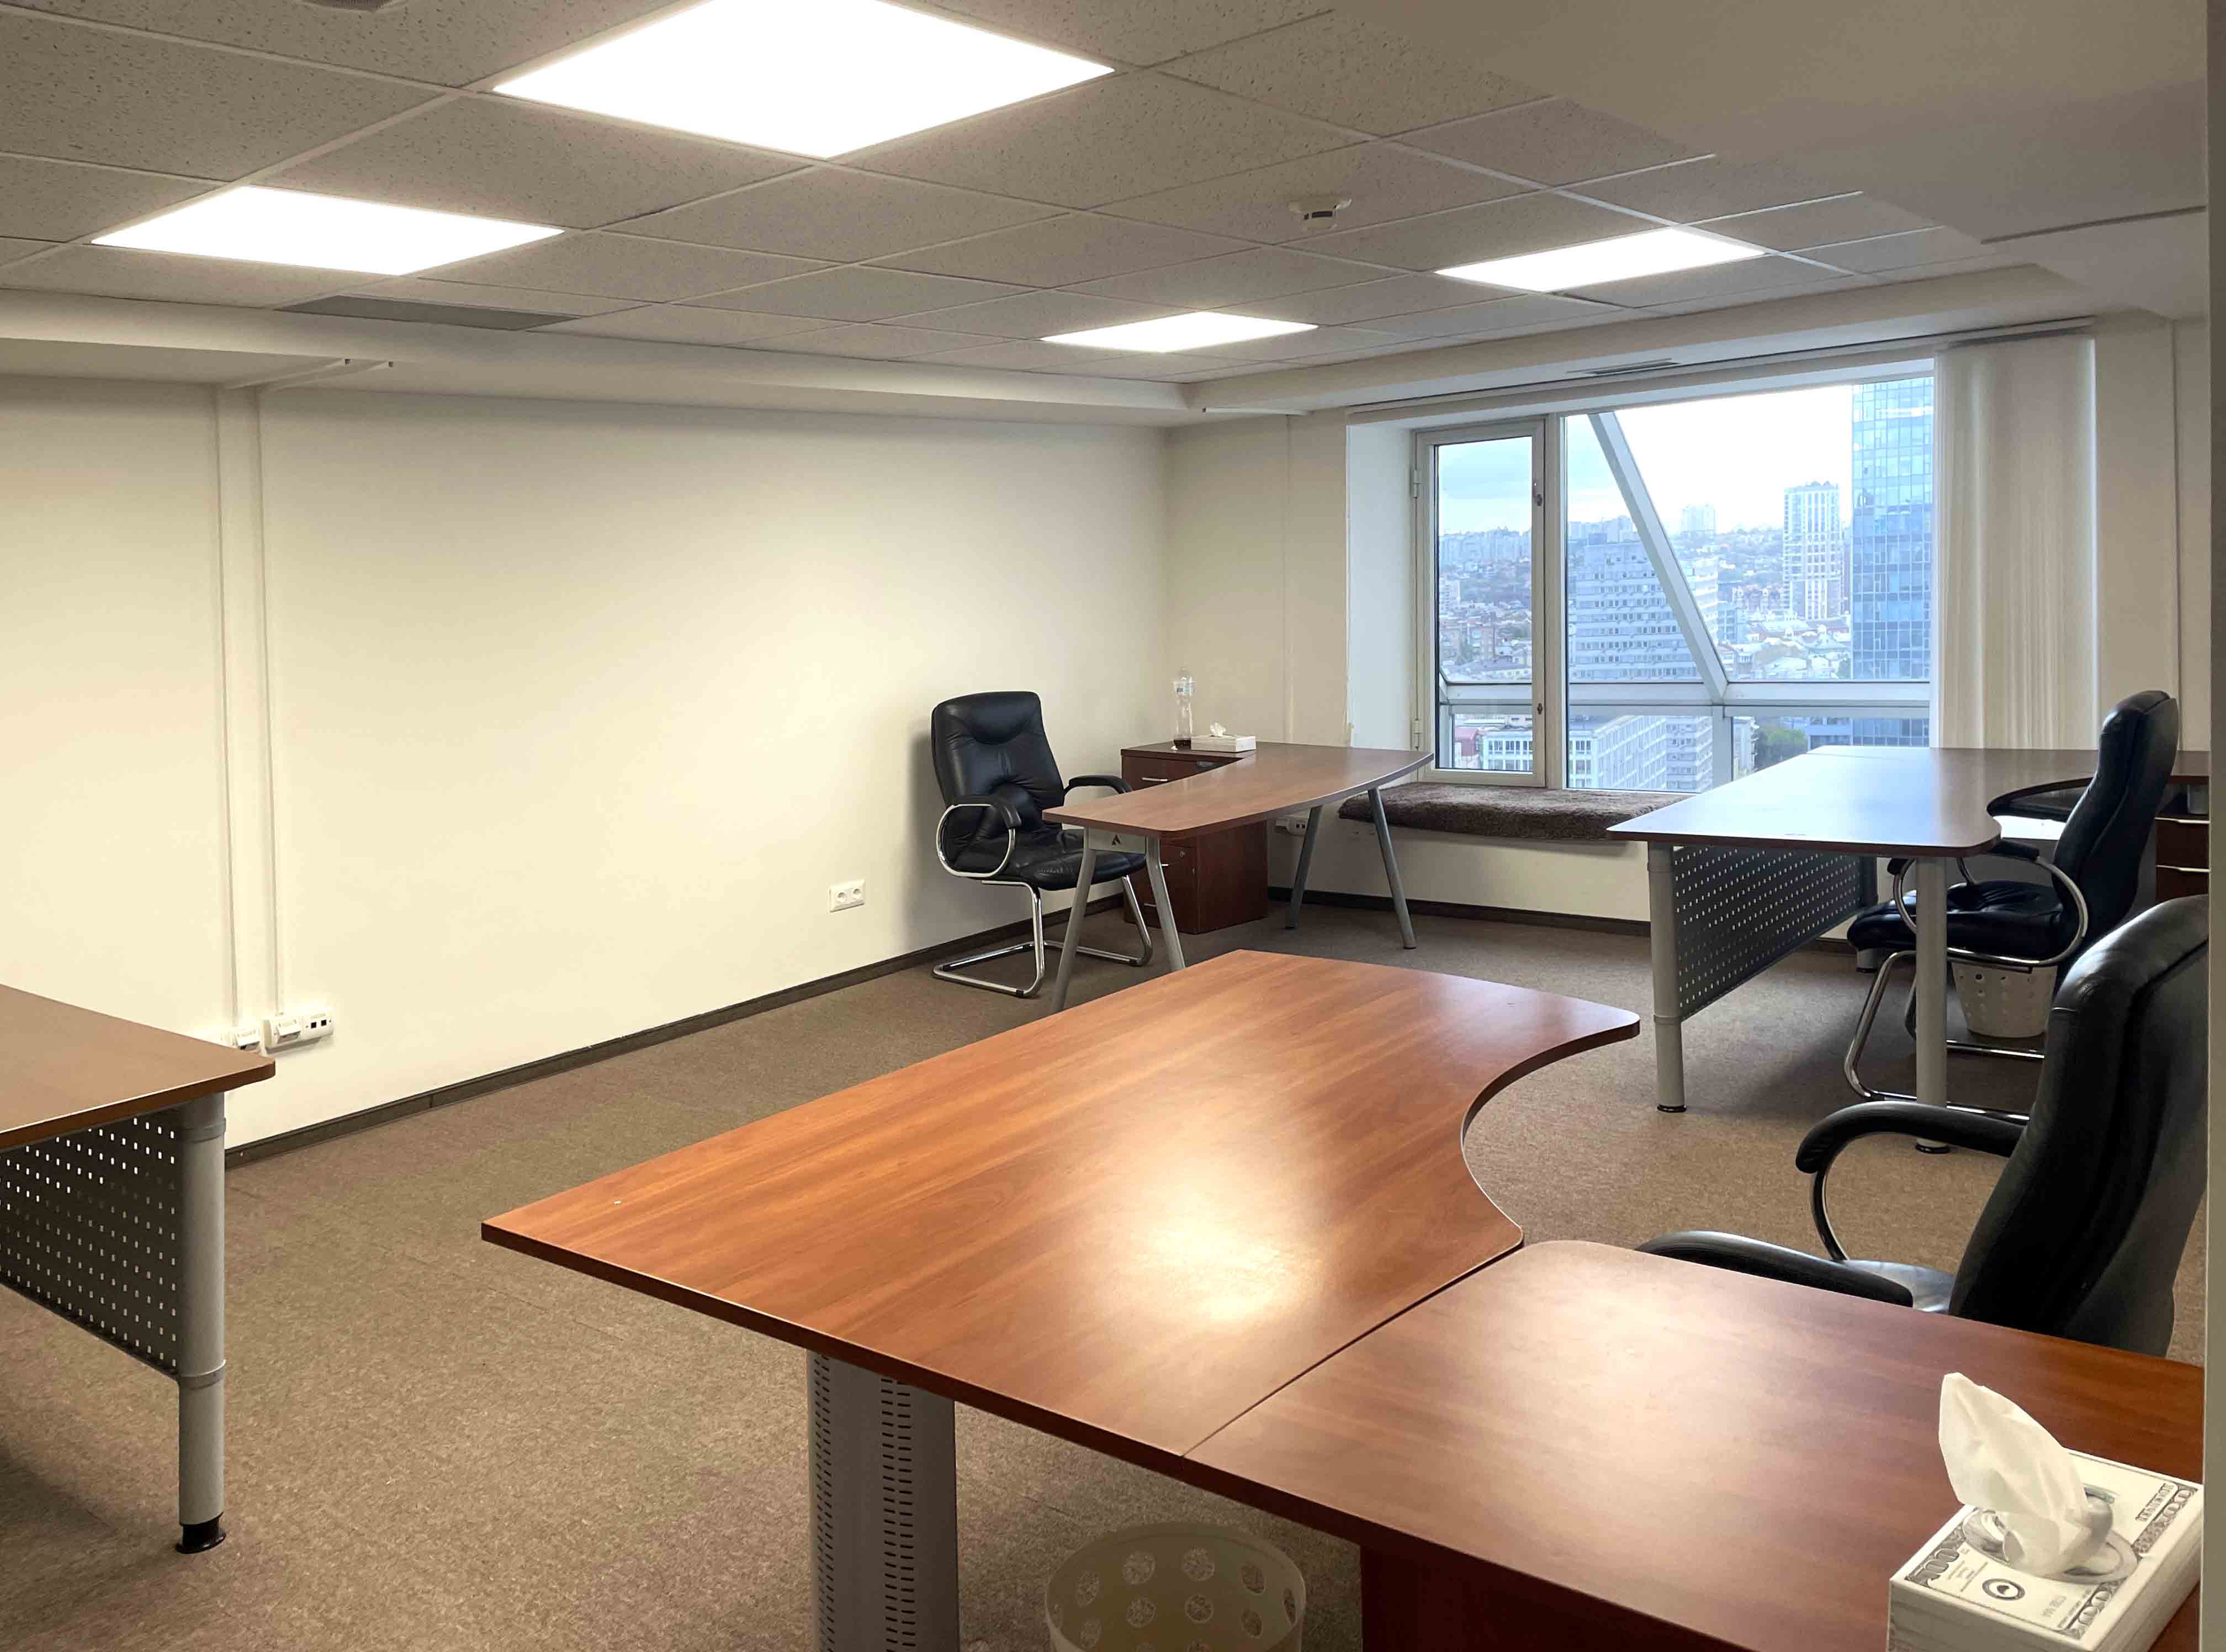 Rent office in the business center with an area of 45 sq m